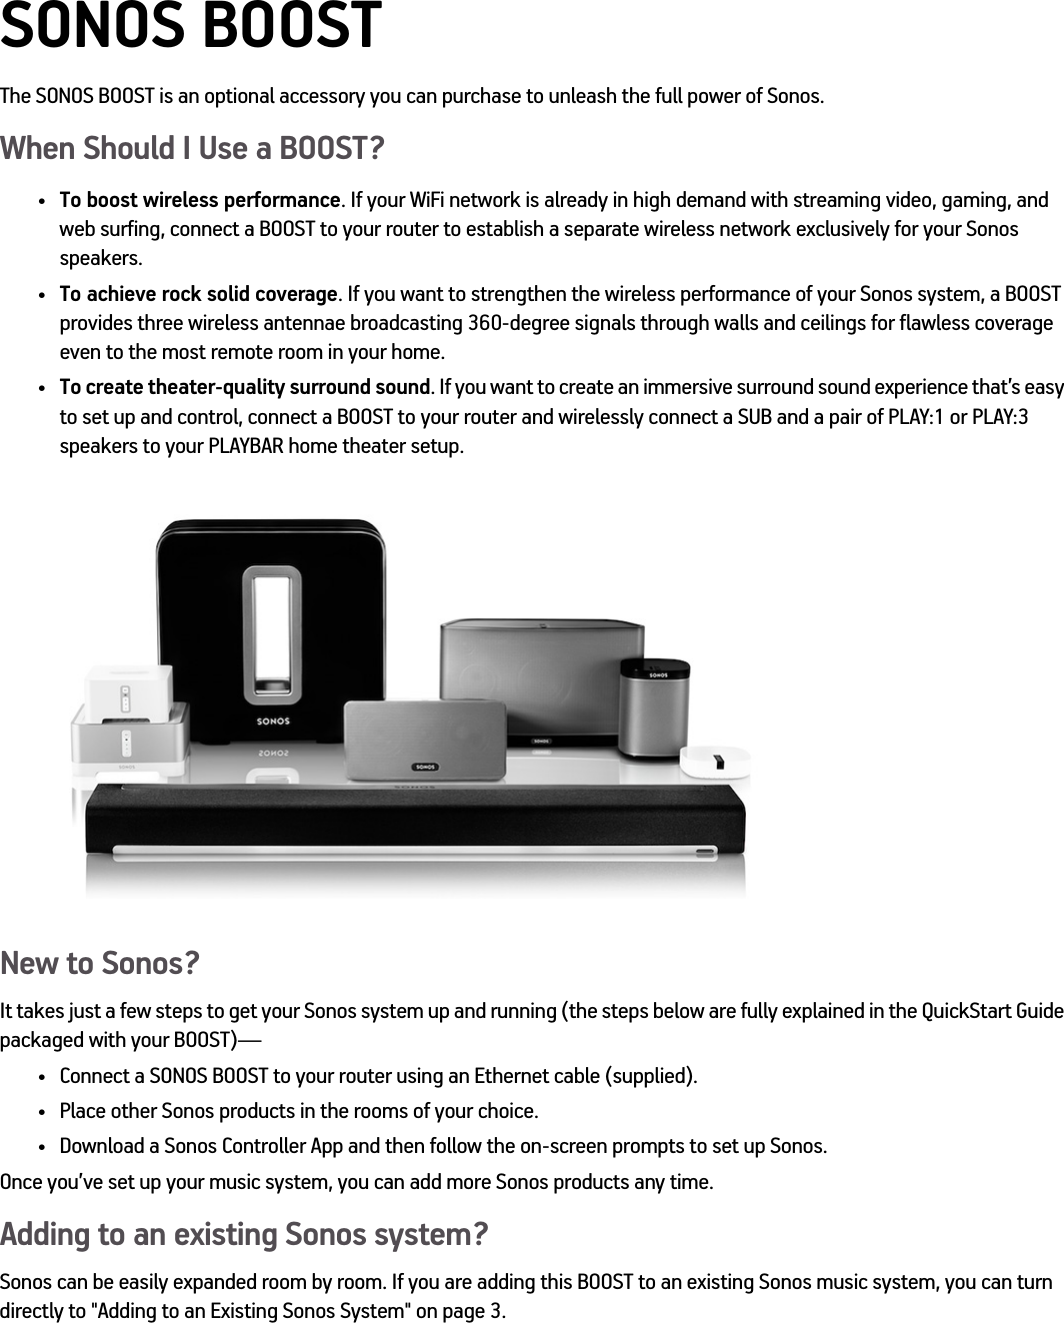 SONOS BOOSTThe SONOS BOOST is an optional accessory you can purchase to unleash the full power of Sonos.When Should I Use a BOOST?•To boost wireless performance. If your WiFi network is already in high demand with streaming video, gaming, and web surfing, connect a BOOST to your router to establish a separate wireless network exclusively for your Sonos speakers.•To achieve rock solid coverage. If you want to strengthen the wireless performance of your Sonos system, a BOOST provides three wireless antennae broadcasting 360-degree signals through walls and ceilings for flawless coverage even to the most remote room in your home.•To create theater-quality surround sound. If you want to create an immersive surround sound experience that’s easy to set up and control, connect a BOOST to your router and wirelessly connect a SUB and a pair of PLAY:1 or PLAY:3 speakers to your PLAYBAR home theater setup.New to Sonos?It takes just a few steps to get your Sonos system up and running (the steps below are fully explained in the QuickStart Guide packaged with your BOOST)—• Connect a SONOS BOOST to your router using an Ethernet cable (supplied). • Place other Sonos products in the rooms of your choice. • Download a Sonos Controller App and then follow the on-screen prompts to set up Sonos.Once you’ve set up your music system, you can add more Sonos products any time.Adding to an existing Sonos system?Sonos can be easily expanded room by room. If you are adding this BOOST to an existing Sonos music system, you can turn directly to &quot;Adding to an Existing Sonos System&quot; on page 3.